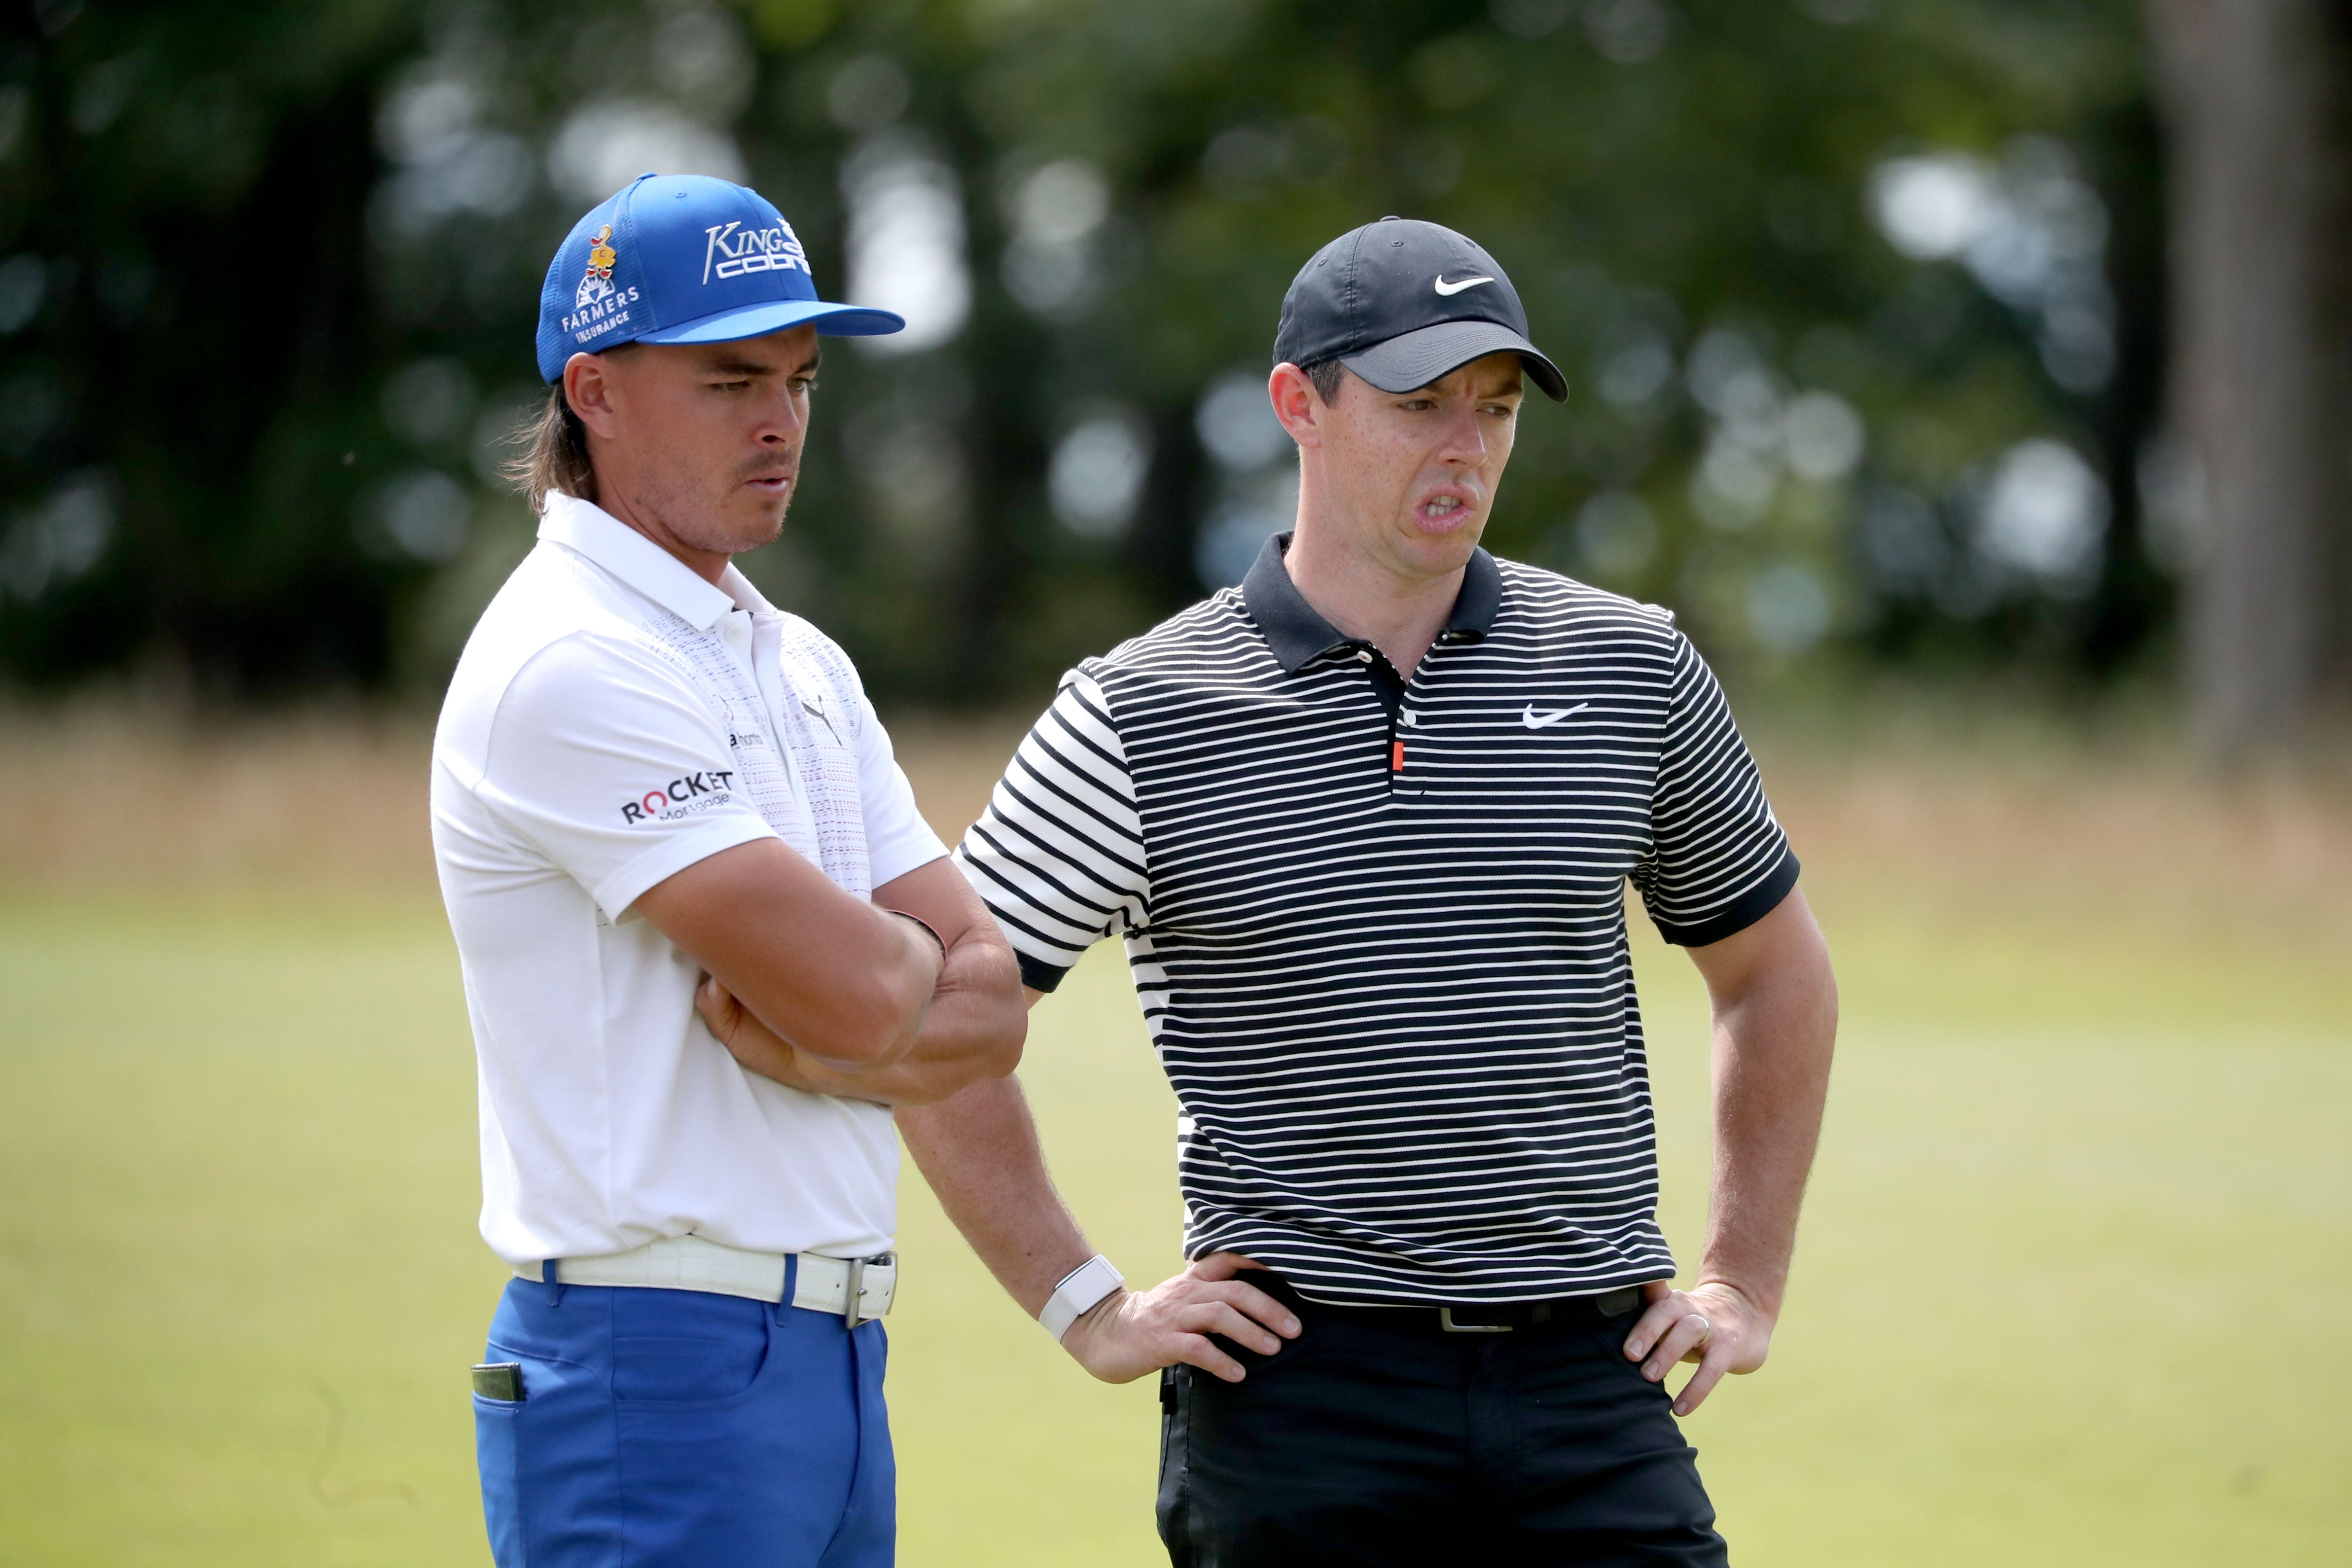 US Open Wrap Rickie Fowler hits 18 birdies in two days, McIlroy two behind lead The Independent